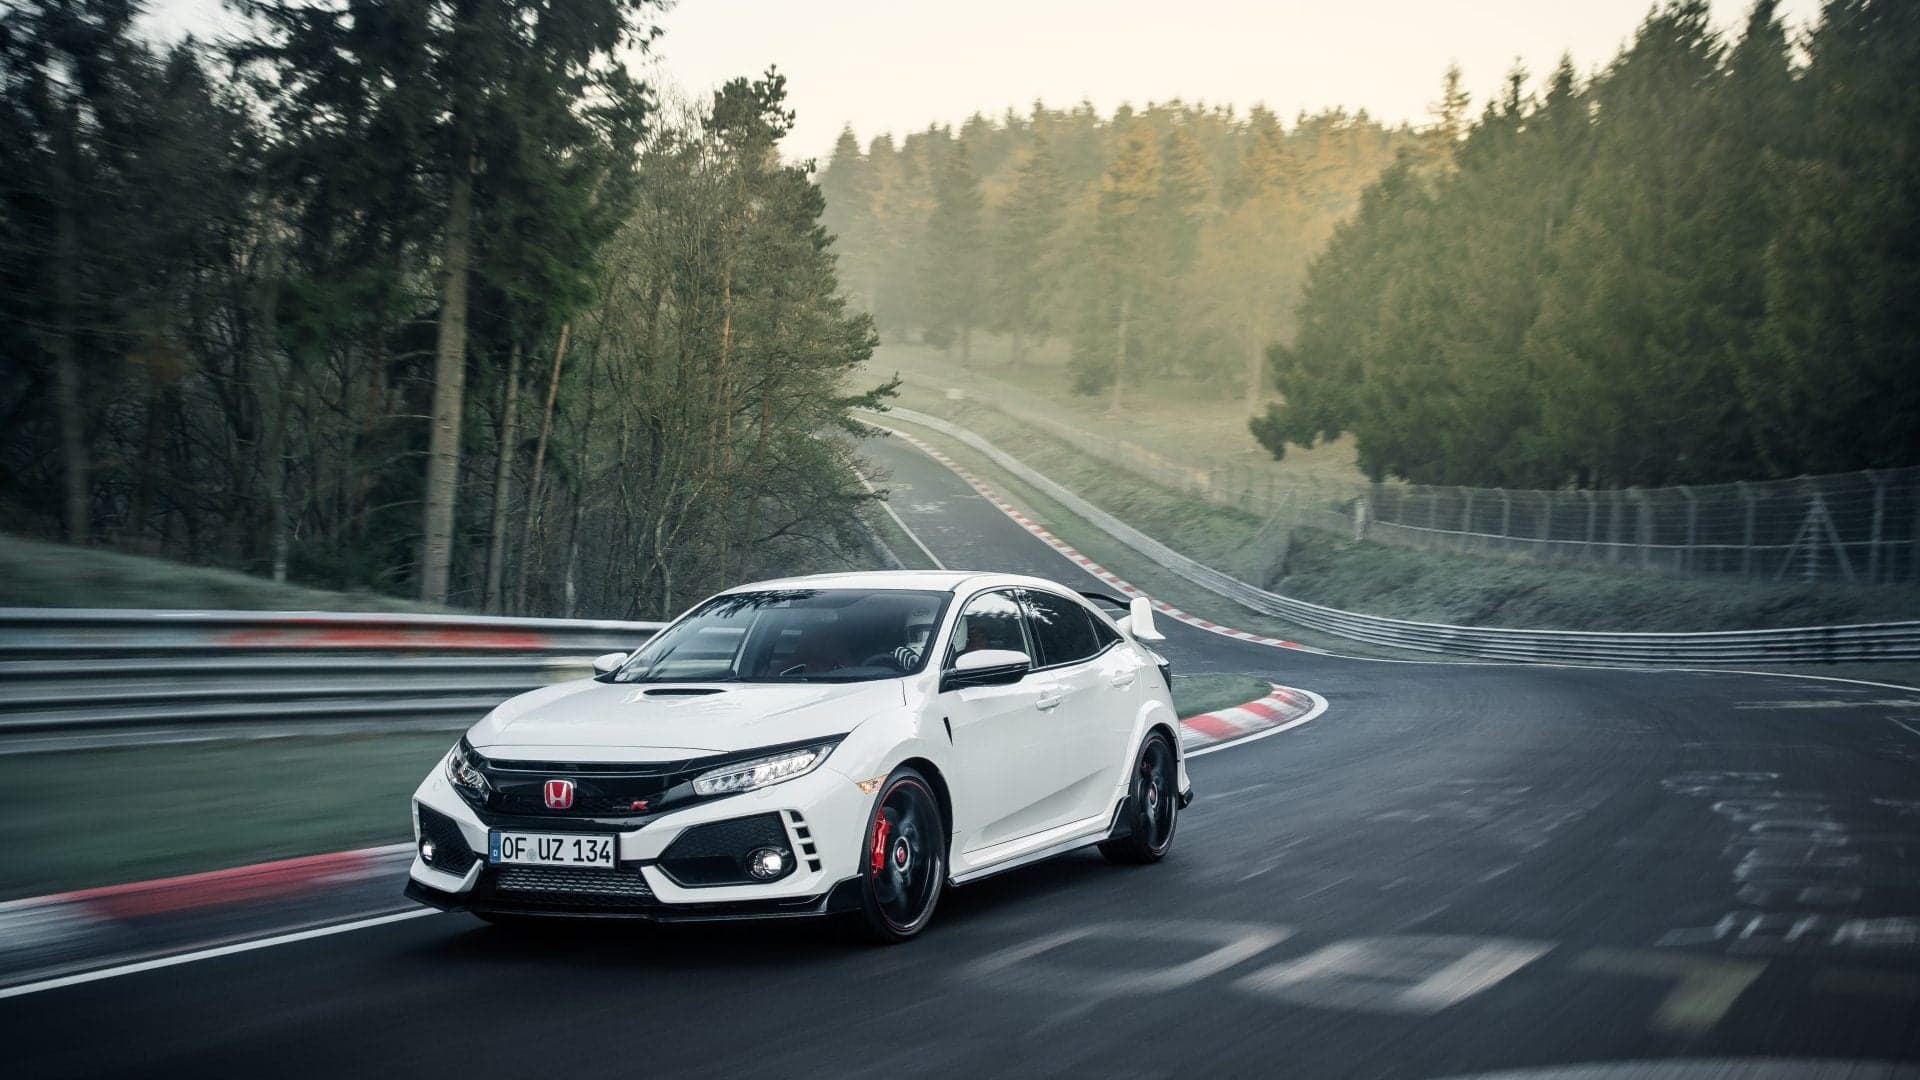 The 2017 Honda Civic Type R Breaks the FWD Nurburgring Record